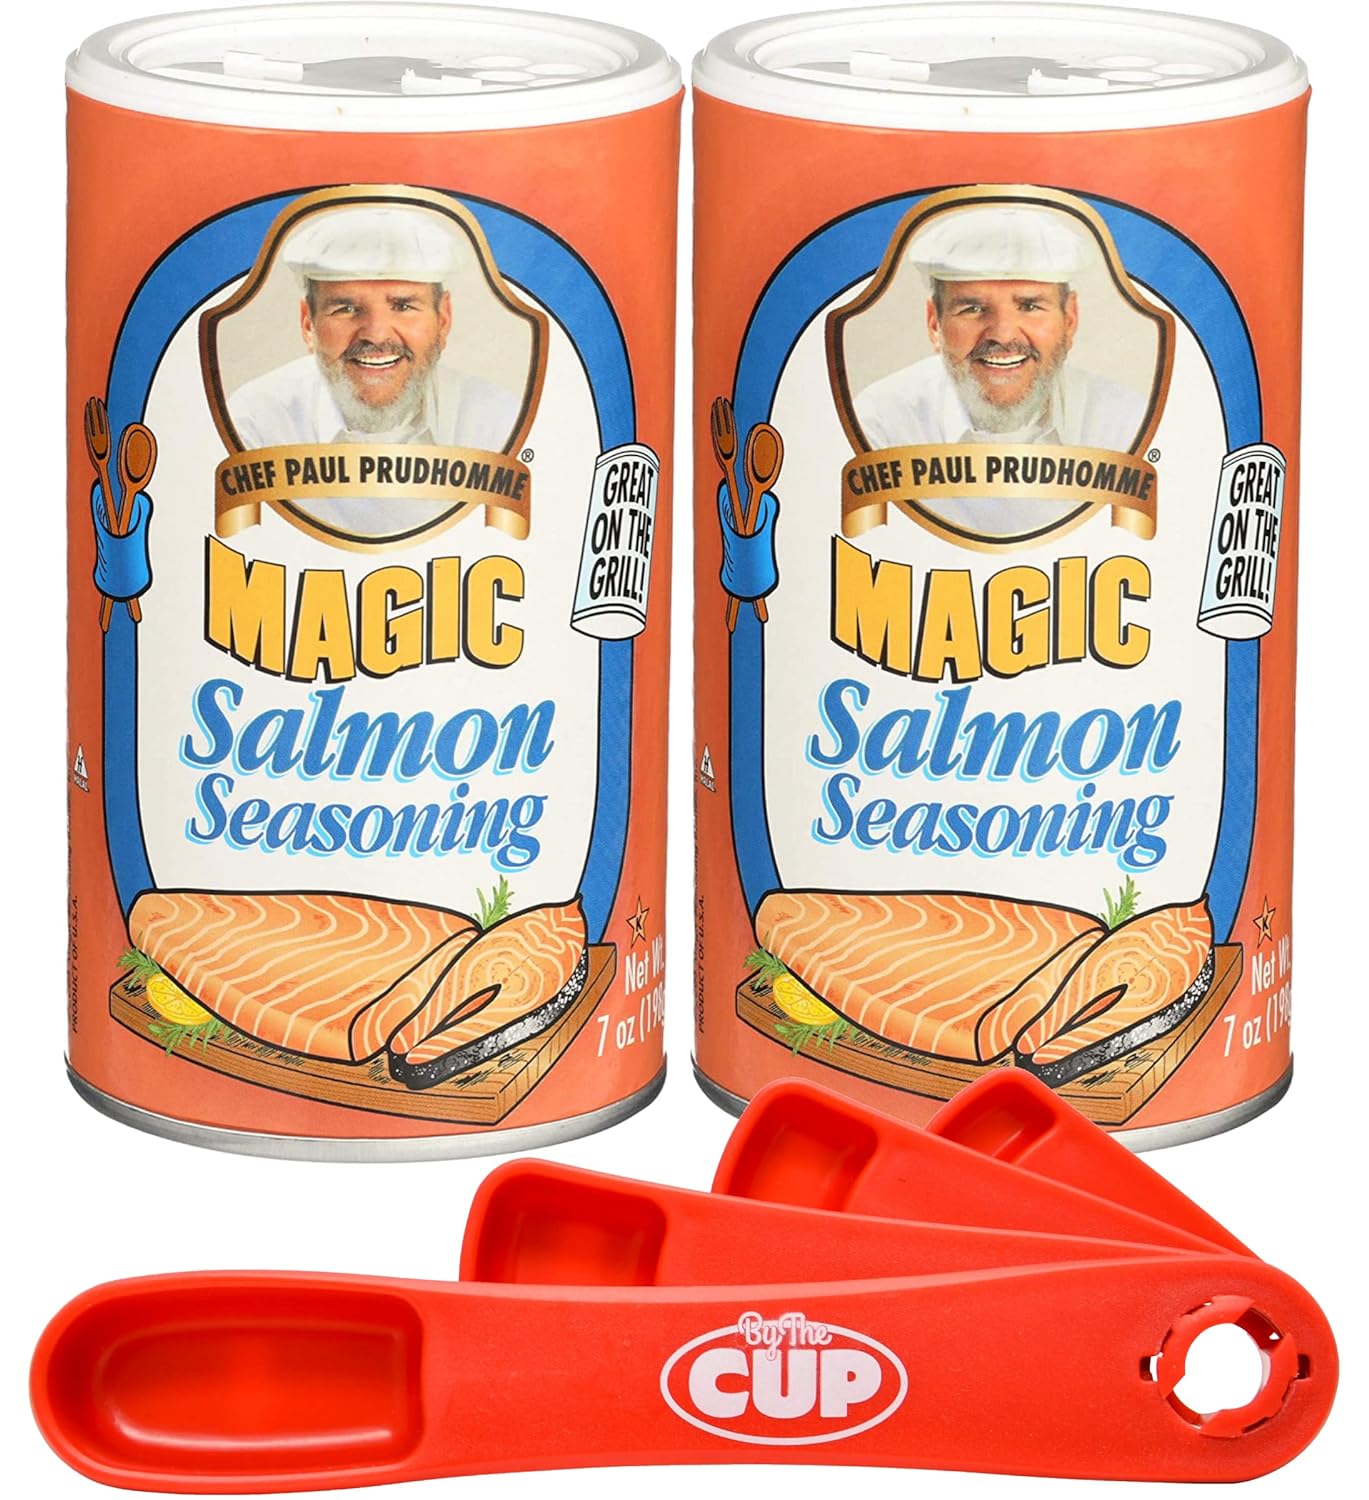 Chef Paul Prudhomme's Magic Salmon Seasoning, 7 oz Cans (Pack of 2) with By The Cup Swivel Spoon